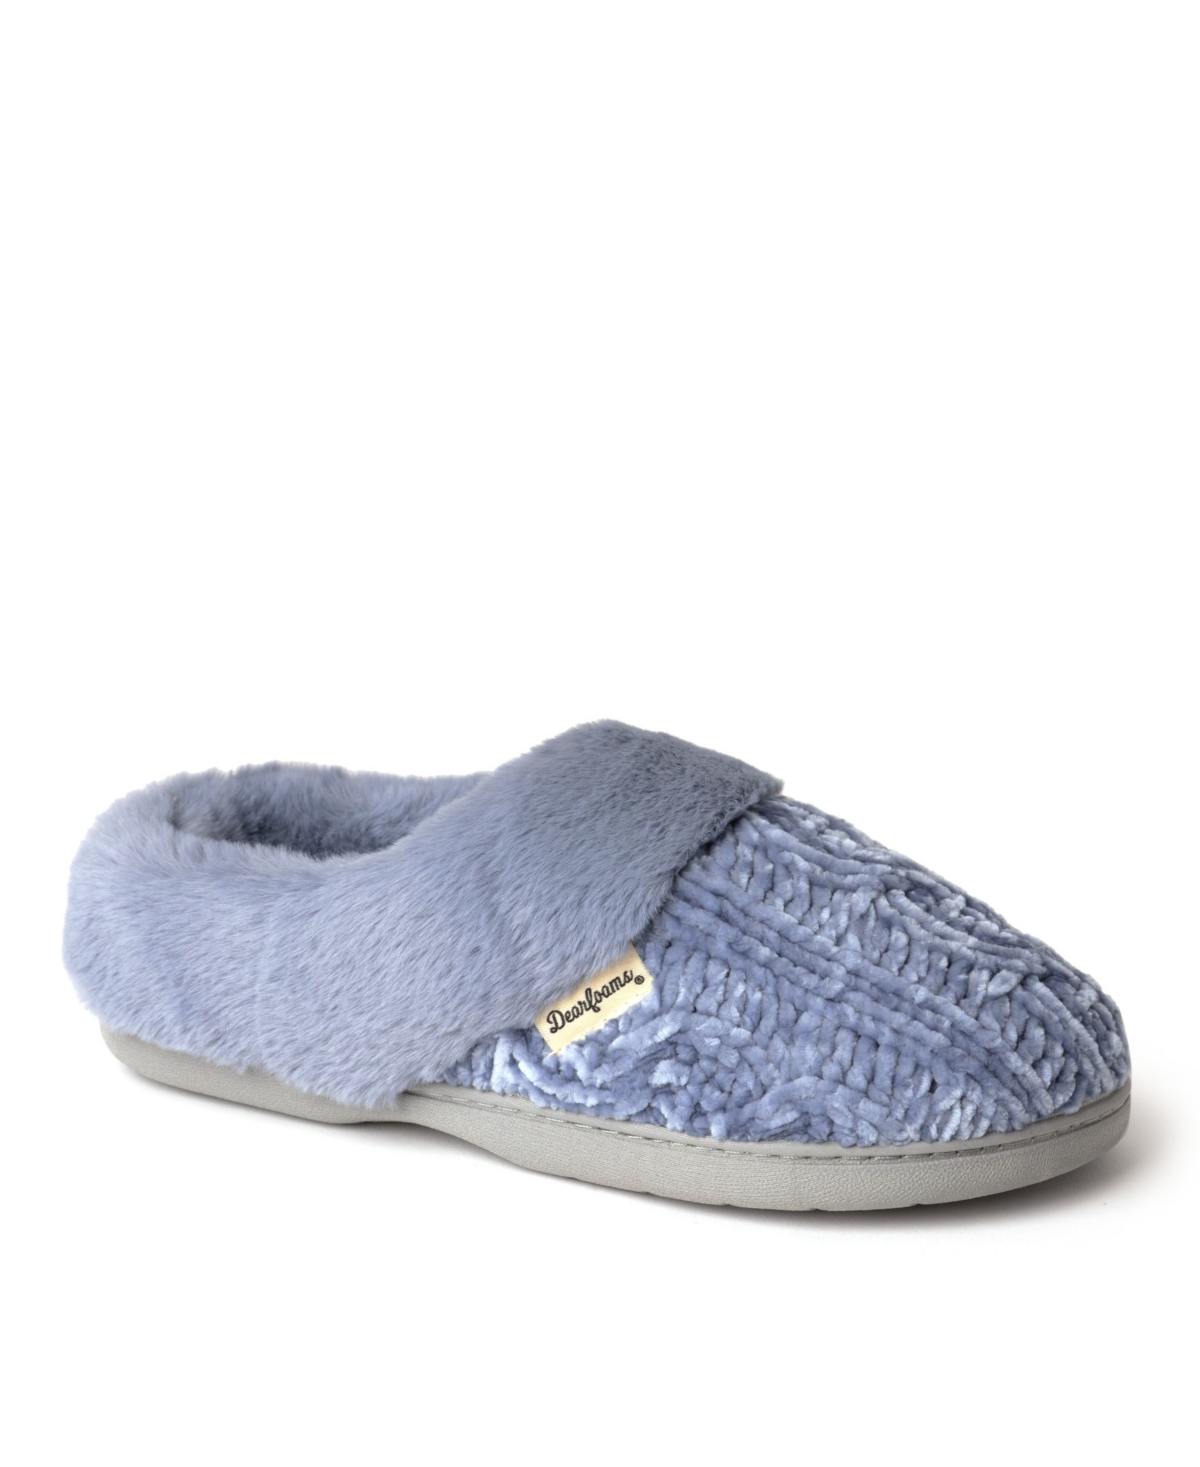 Dearfoams Women's Claire Marled Chenille Knit Clog In Blue